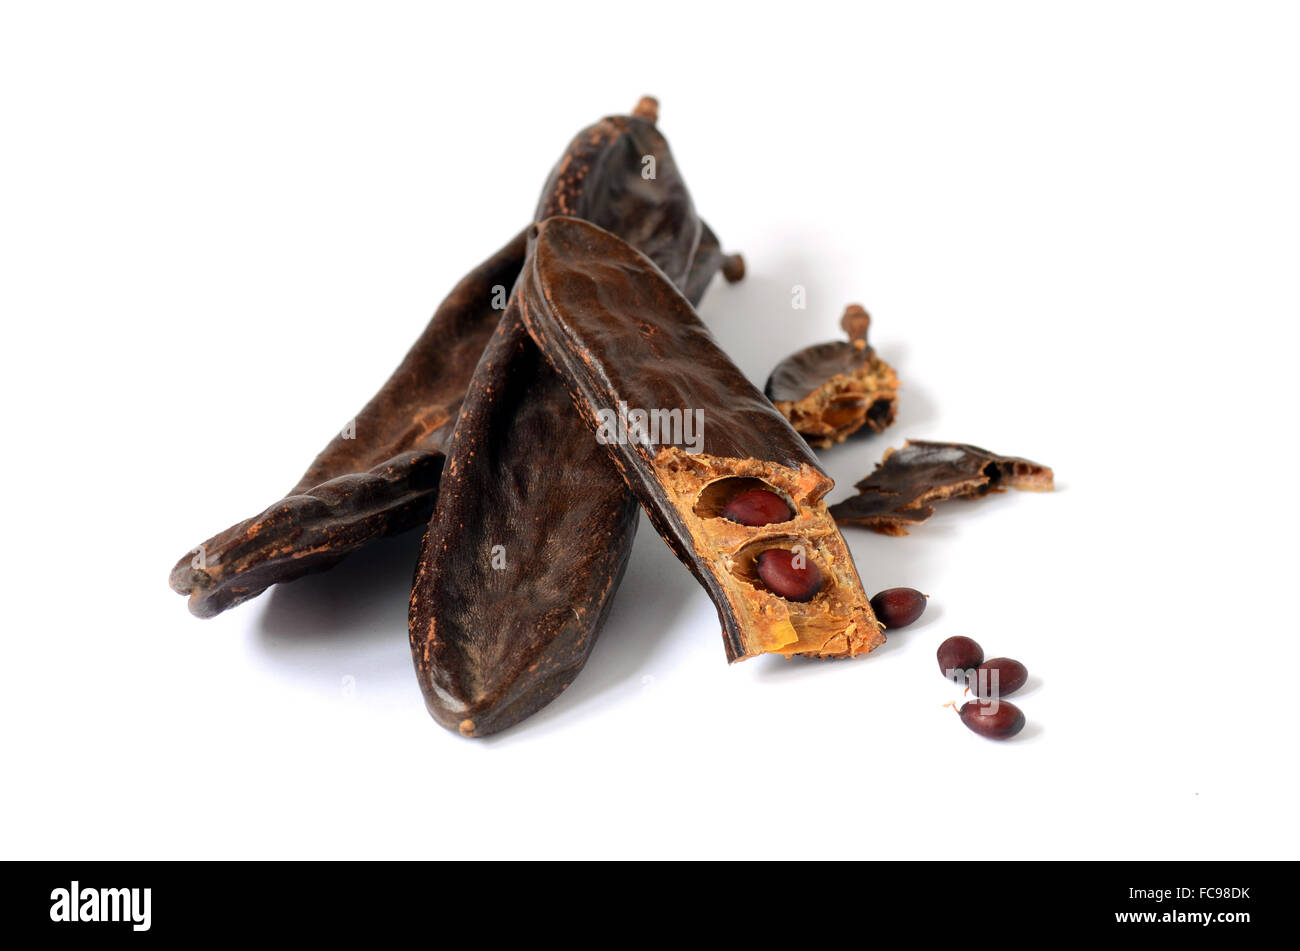 Ripe carob pods, carob powder can be used as a substitute for cocoa Stock Photo